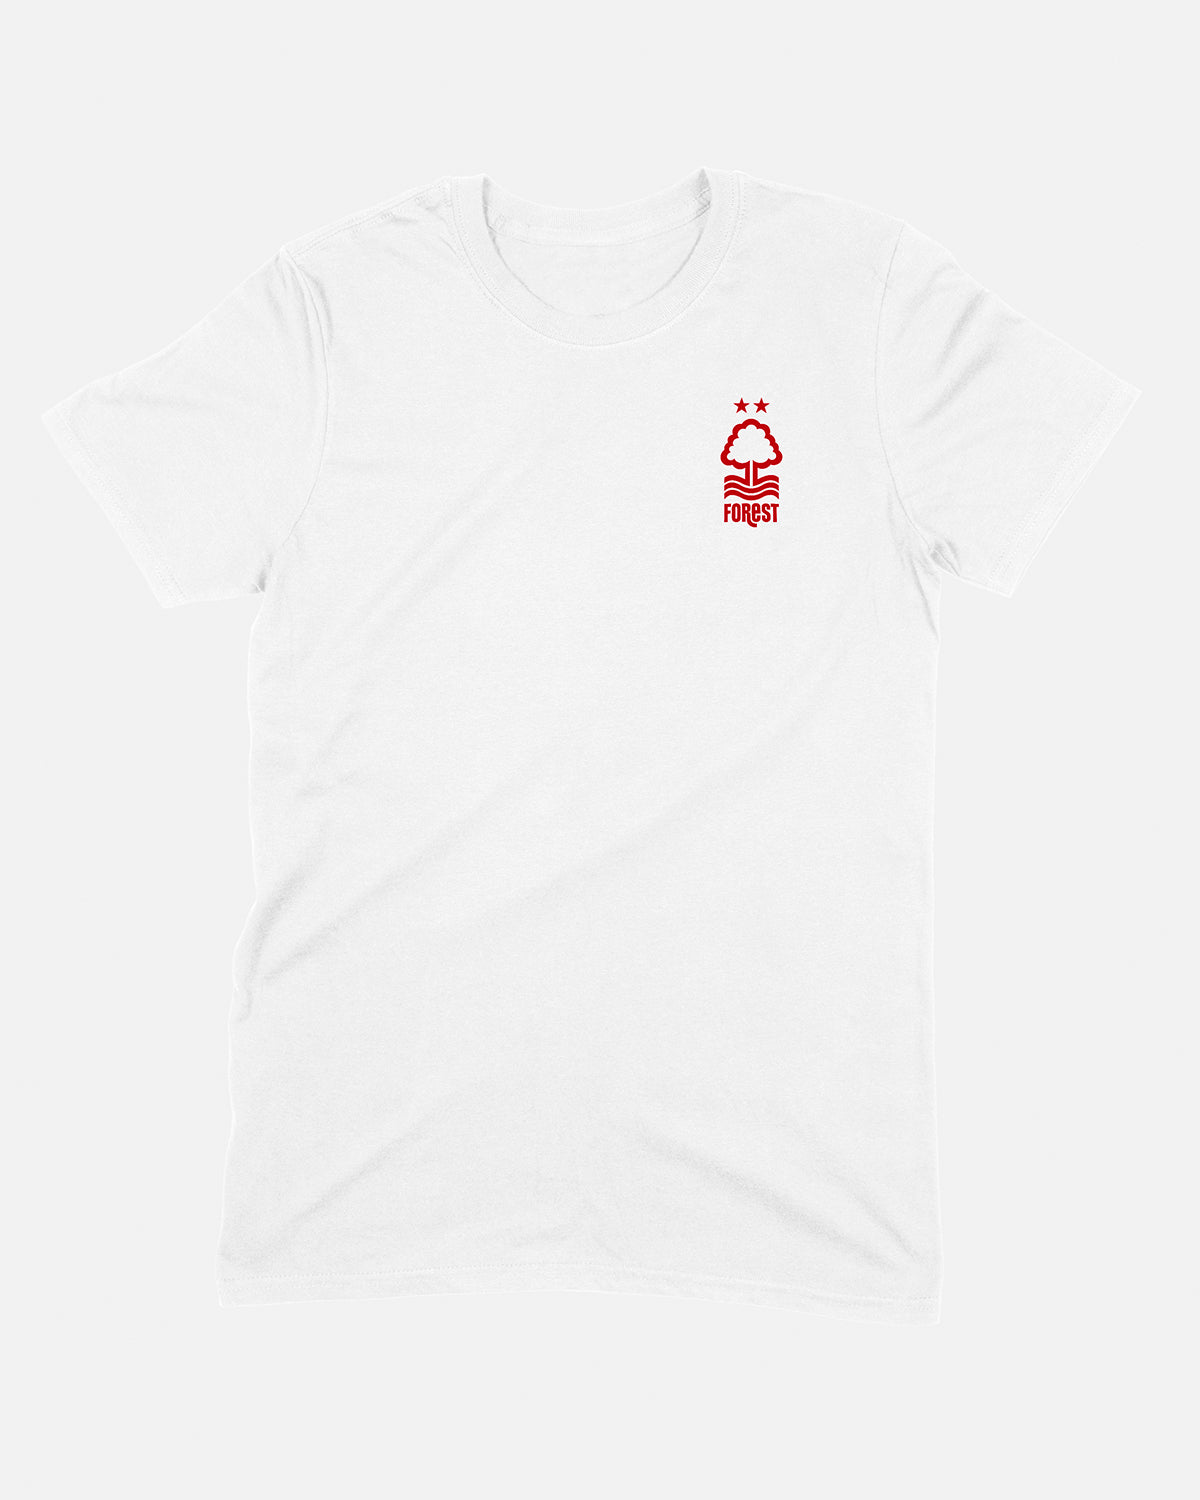 NFFC Classic White T-Shirt - Nottingham Forest FC